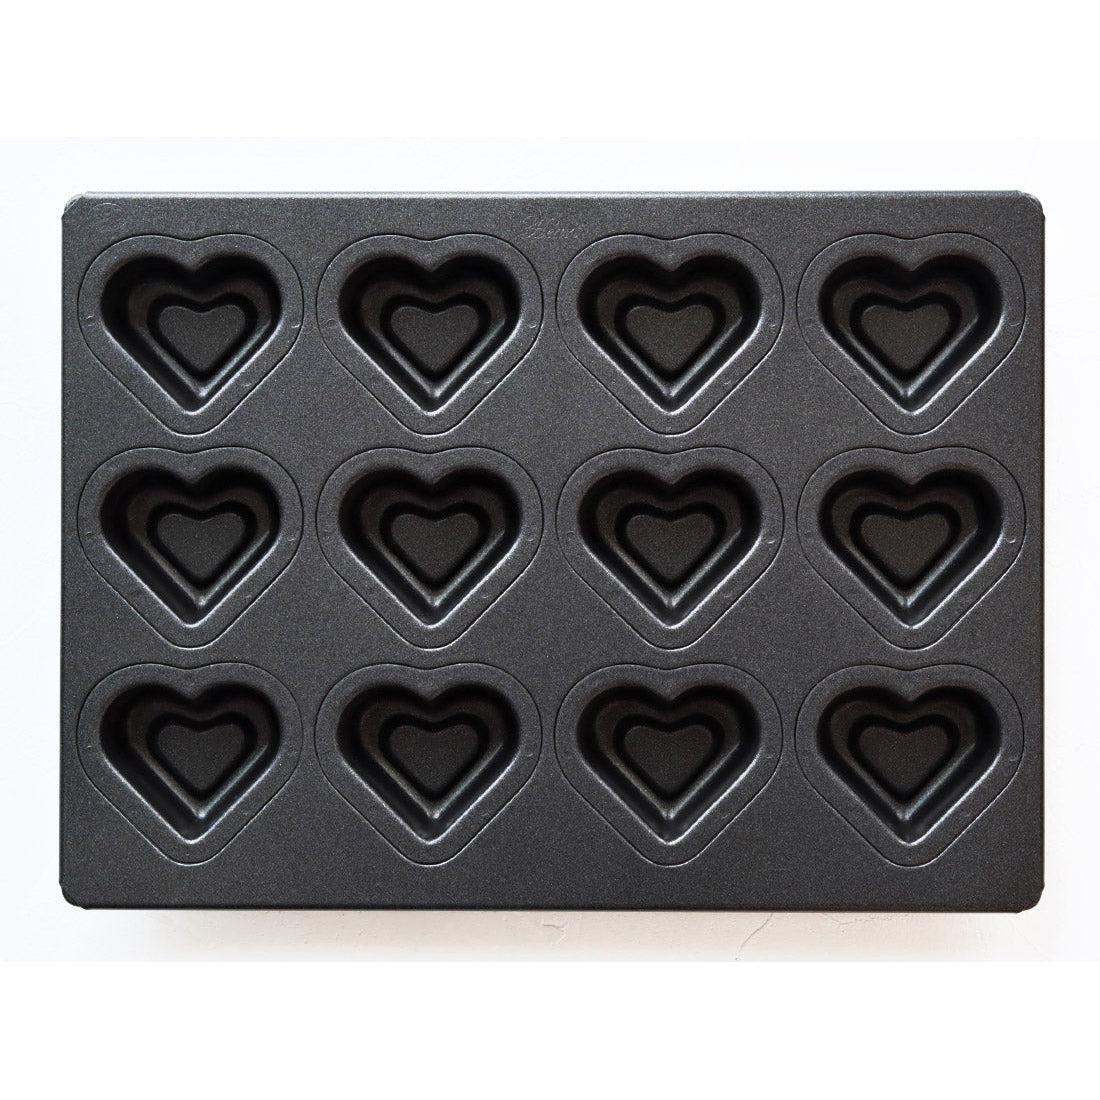 Kitchen 12 Square Silicone Molds, Chocolate Mold, Cake Mold, Cake